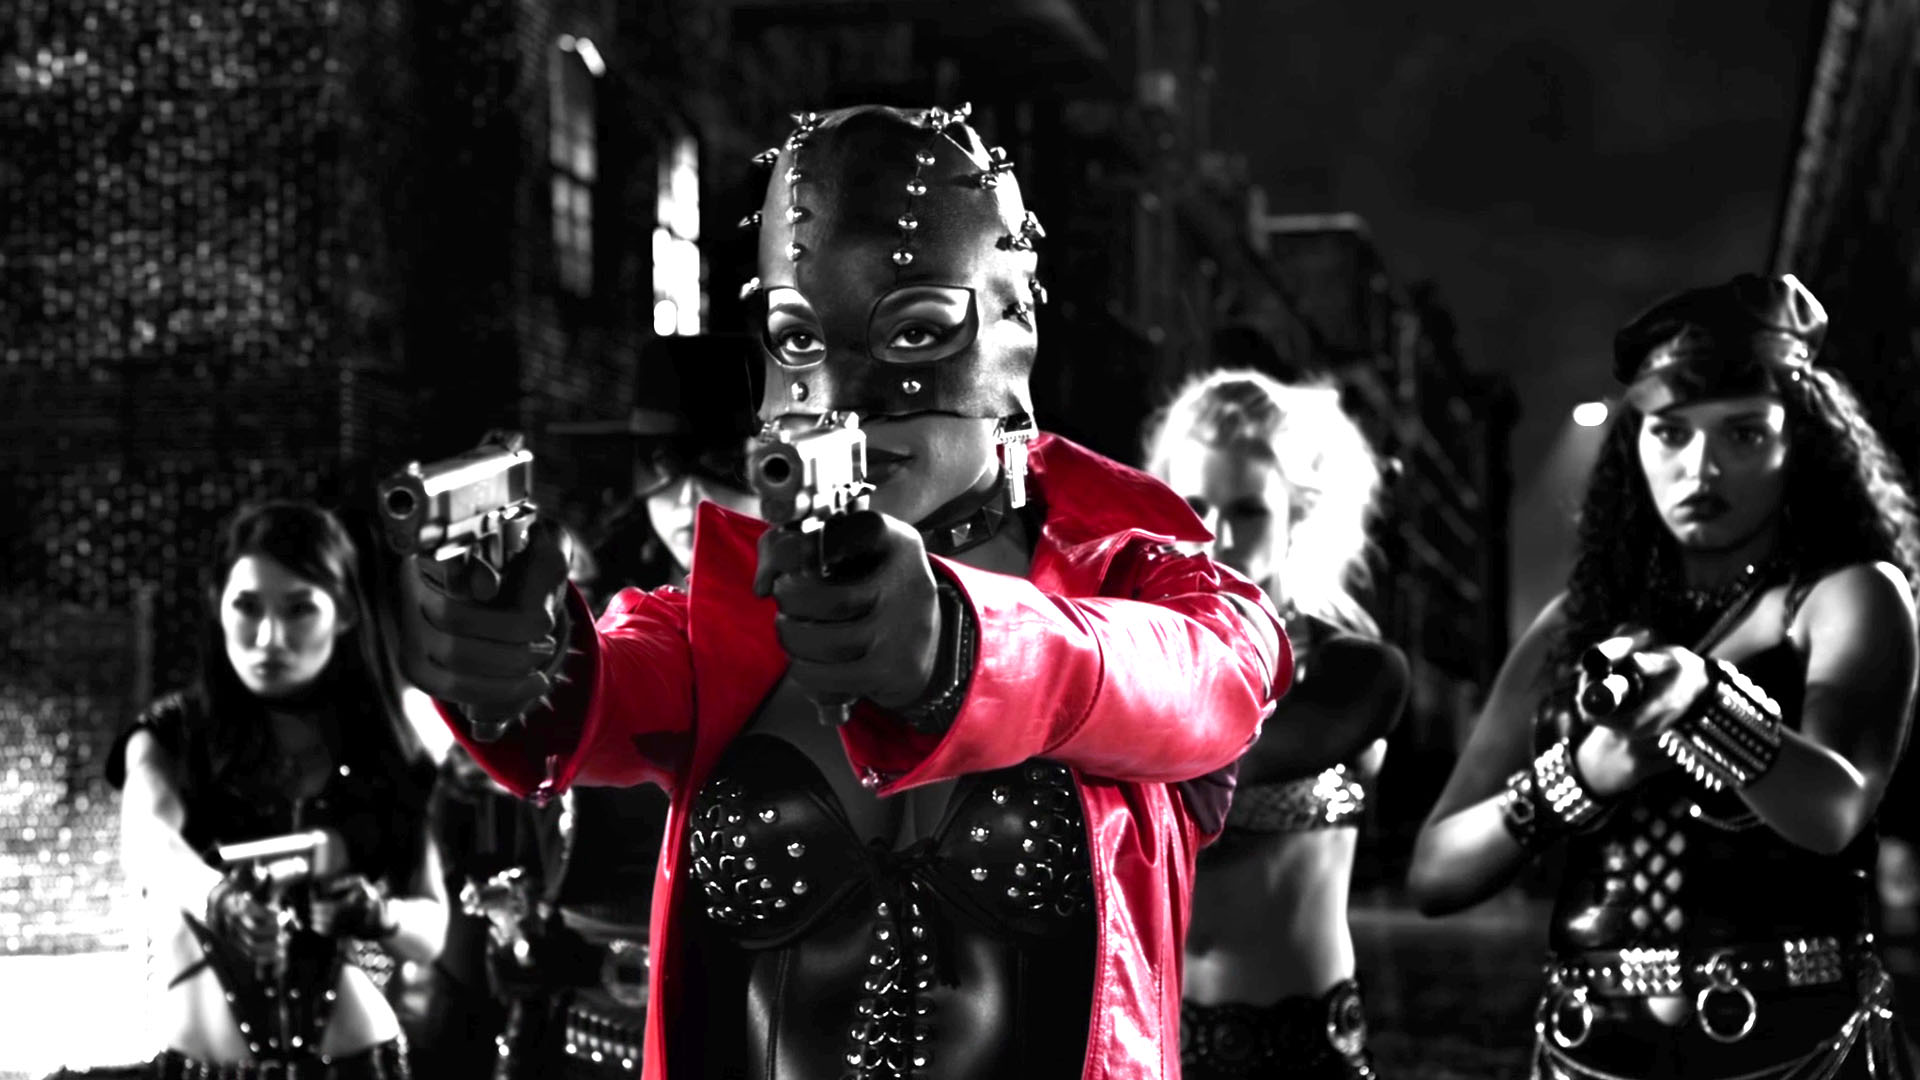 Sin City: A Dame To Kill For Backgrounds, Compatible - PC, Mobile, Gadgets| 1920x1080 px